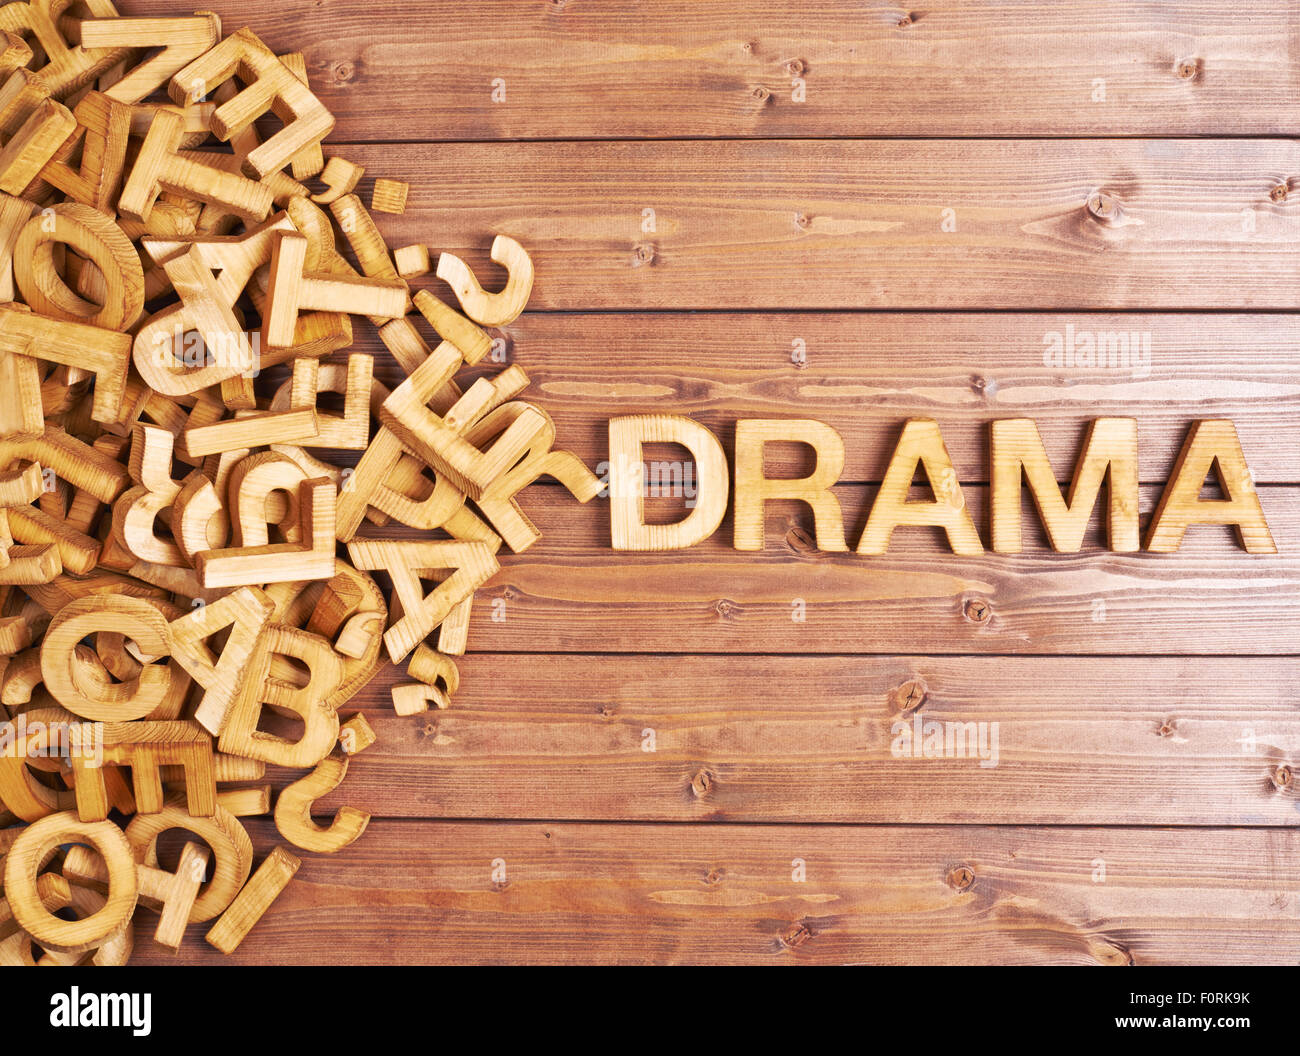 Word drama made with wooden letters Stock Photo